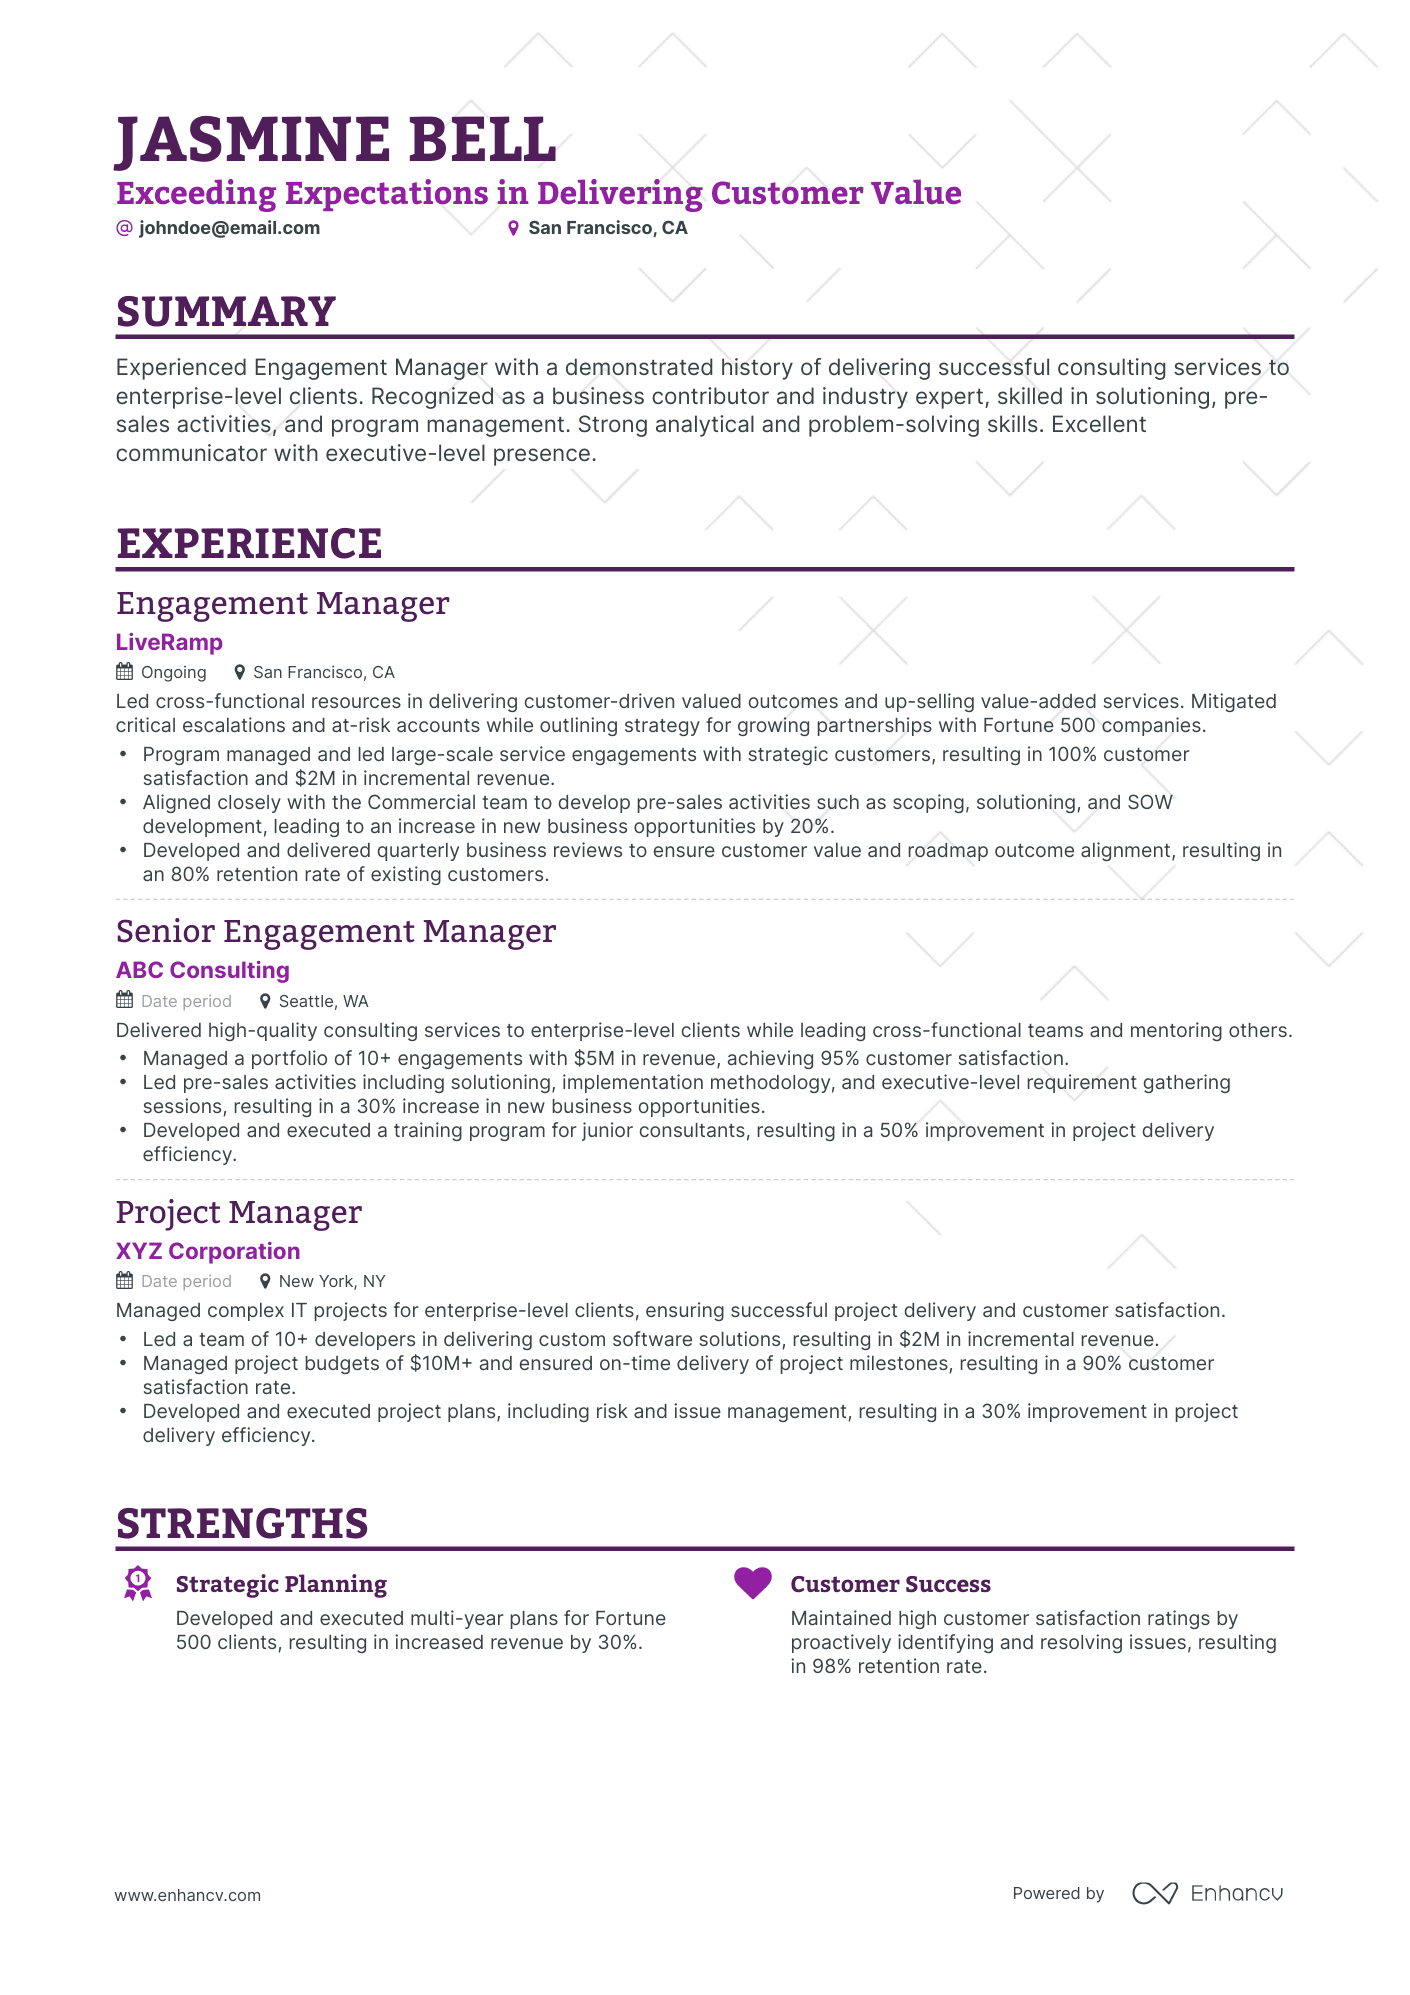 Classic Engagement Manager Resume Template